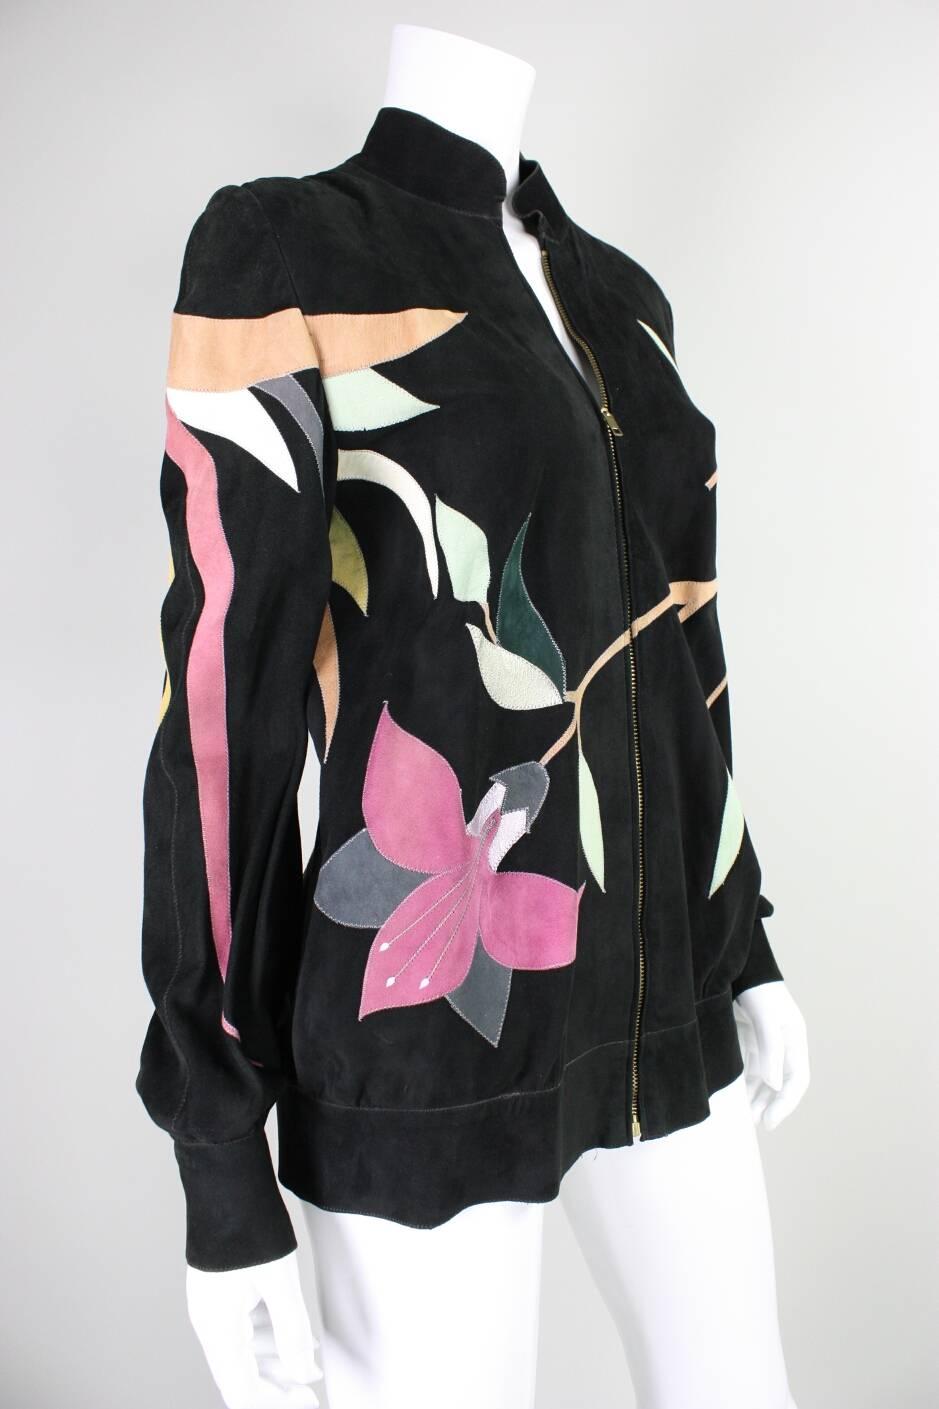 Vintage suede jacket from Roberto Cavalli dates to the 1970’s and is made of black suede that is appliqued with suede in pastel colors.  Dramatic bird on back features three-dimensional feathers.  Center front zipper.  Button cuffs.  Side waist